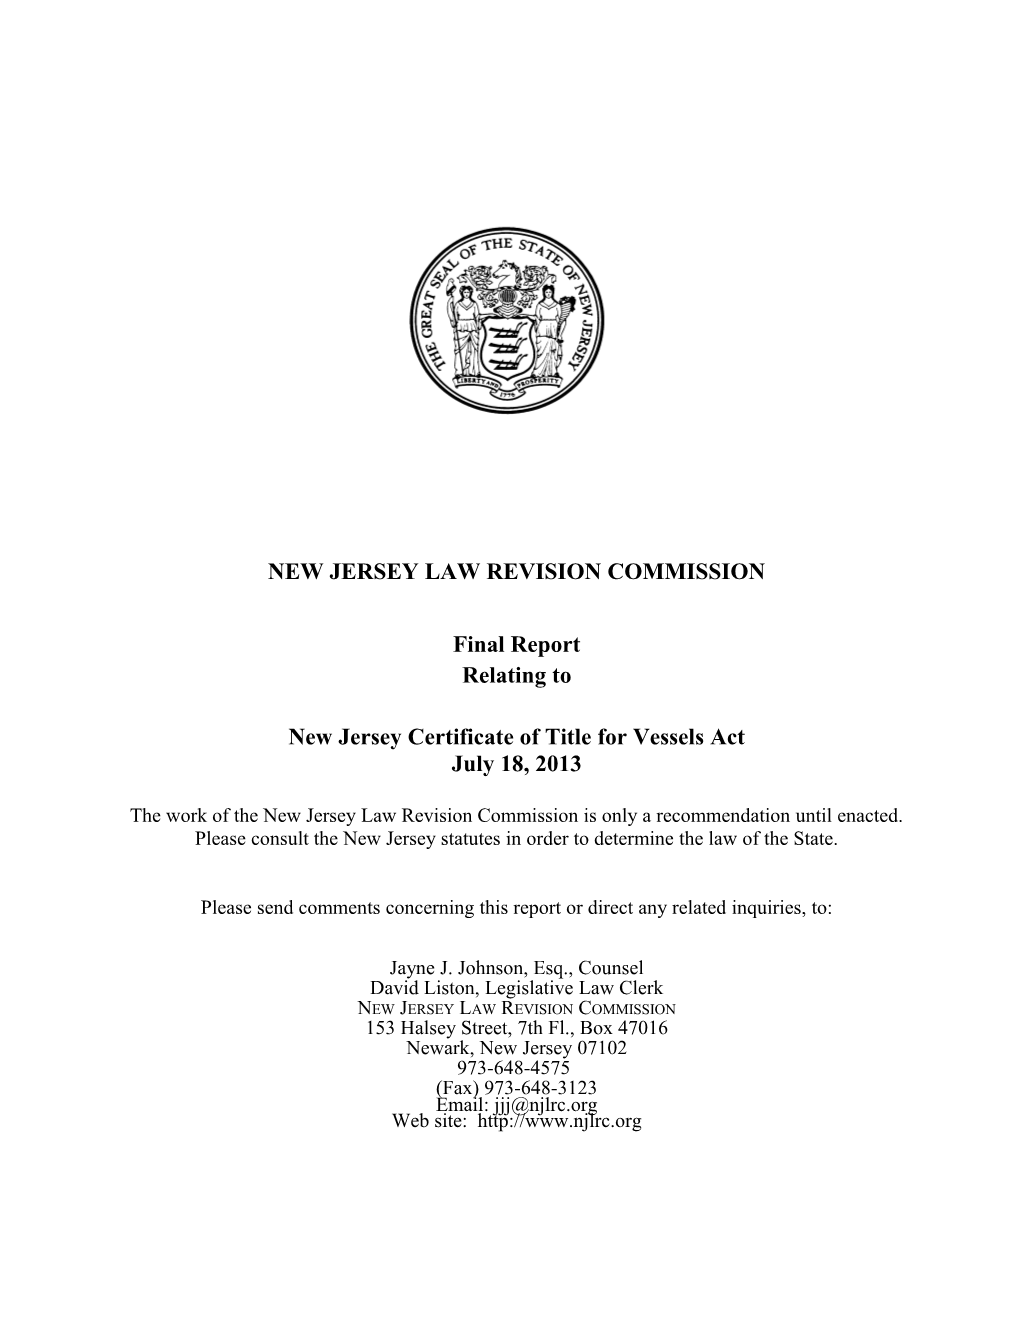 New Jersey Certificate of Title for Vessels Act